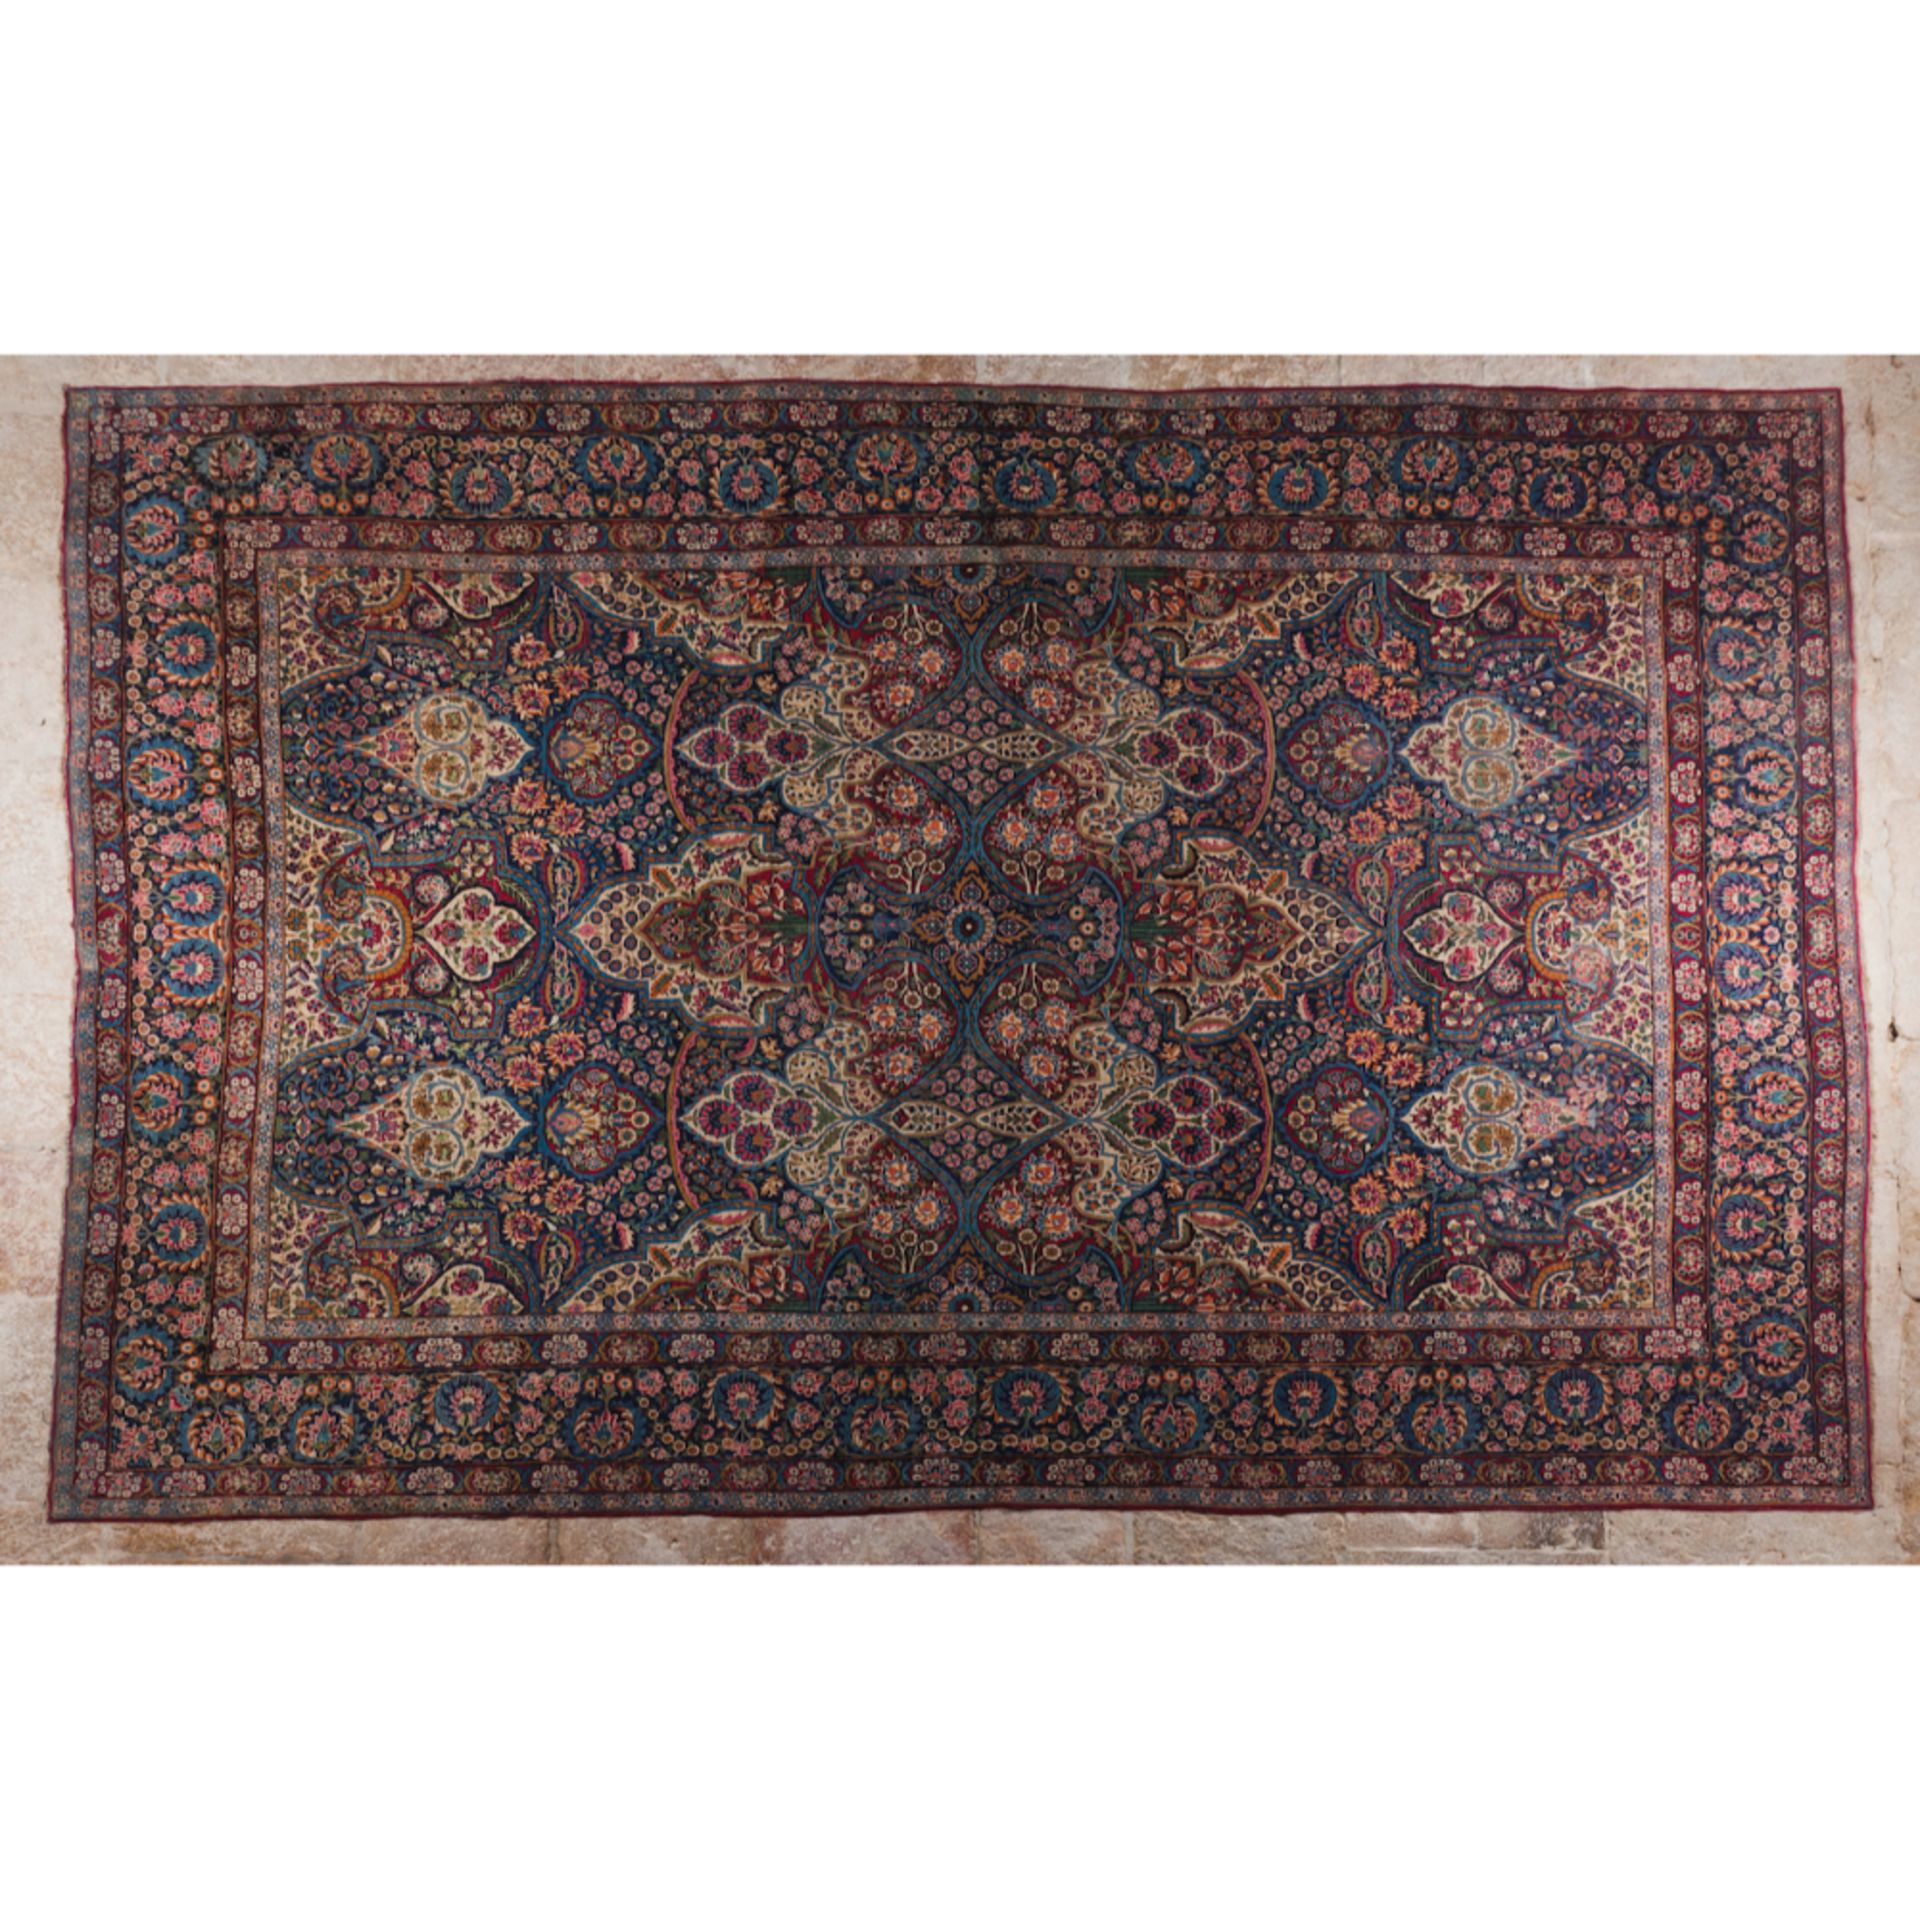 A Sarough rug, IranIn wool and cotton Floral and geometric design in shades of burgundy, blue, green